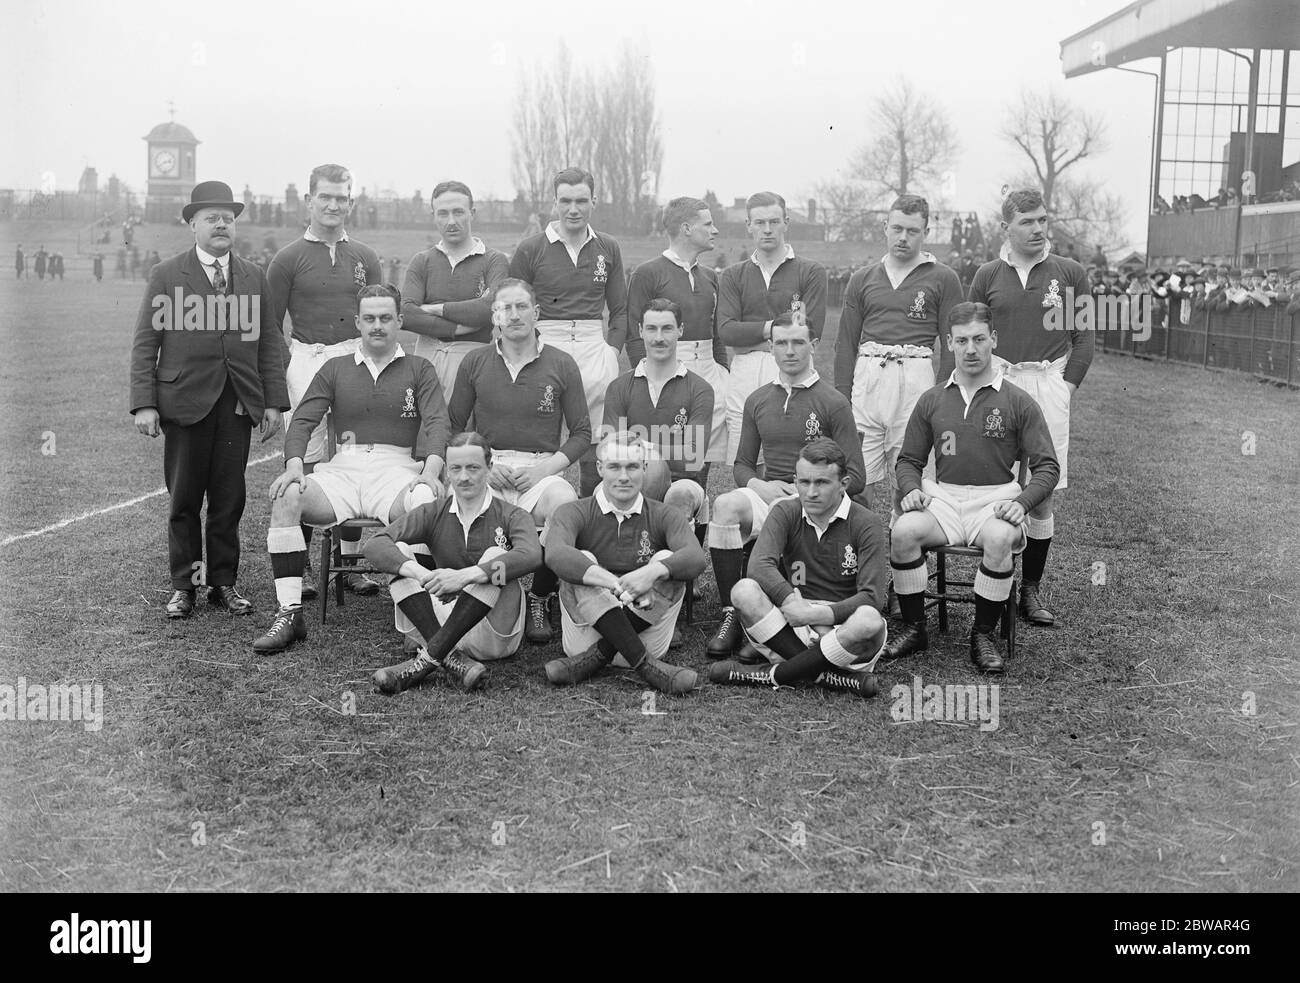 The King and Prince of Wales attend the Navy versus Army rugby match The Army team Back Row ( Left to Right ) CC W Jones , Military Cross , Corporal C Hyland , Lieut G Young , Lieut P E R Baker Jones , Lieut R B V Simpson , Lieut D Cross , Captain J S W Stone Middle Row ( Left to right ) Major W B N Roderick , Major P H Lawless Military Cross , Major R M Scobie , Military Cross , Major E G W Harrison , Military Cross , Lieut H L Day Front Row , ( left to Right ) Captain W M Schewen , Lieut E C Penny , Captain G Hedderwick Military Cross 1920 Stock Photo